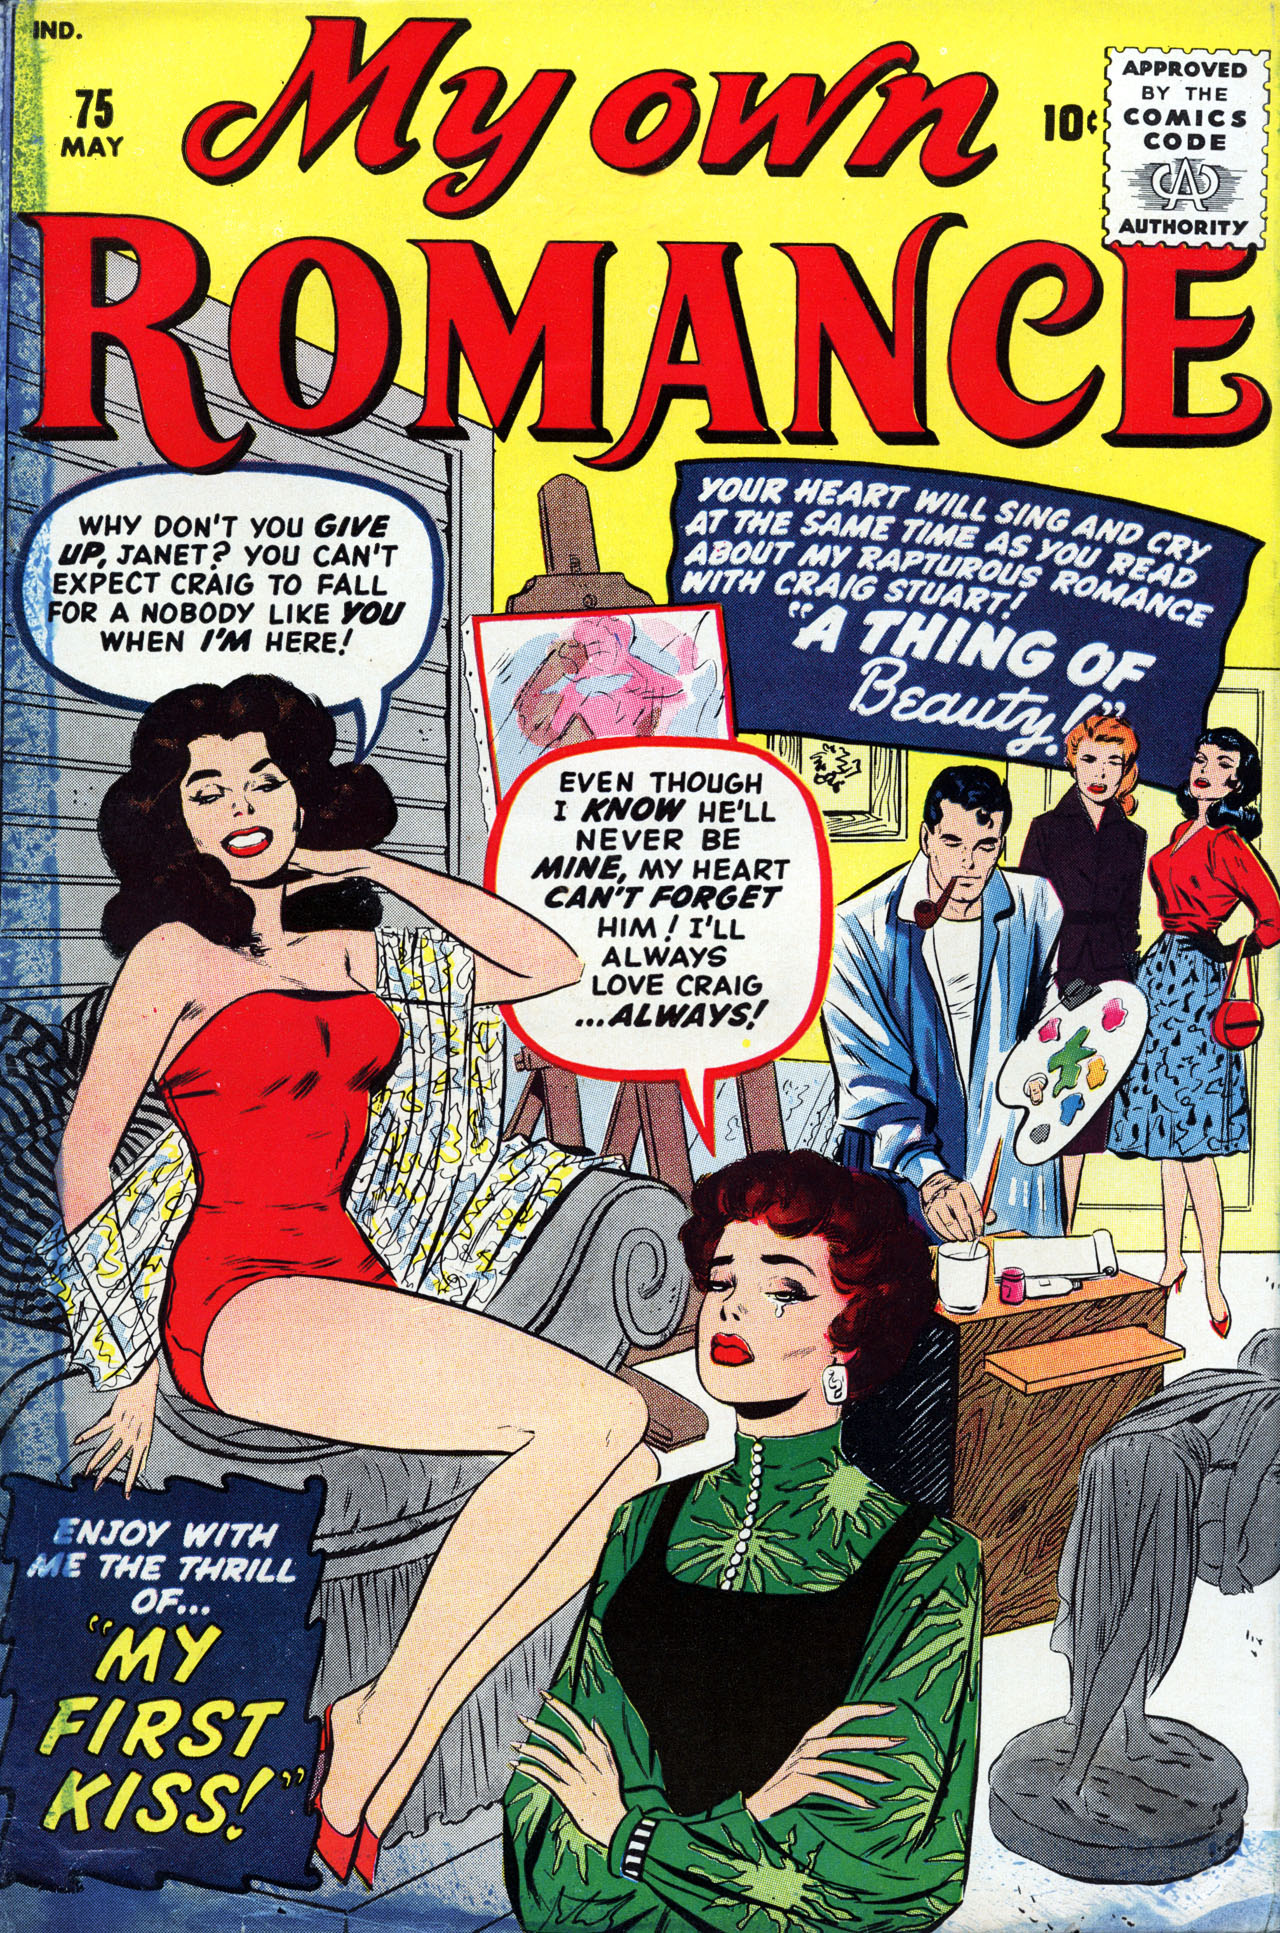 Read online My Own Romance comic -  Issue #75 - 1